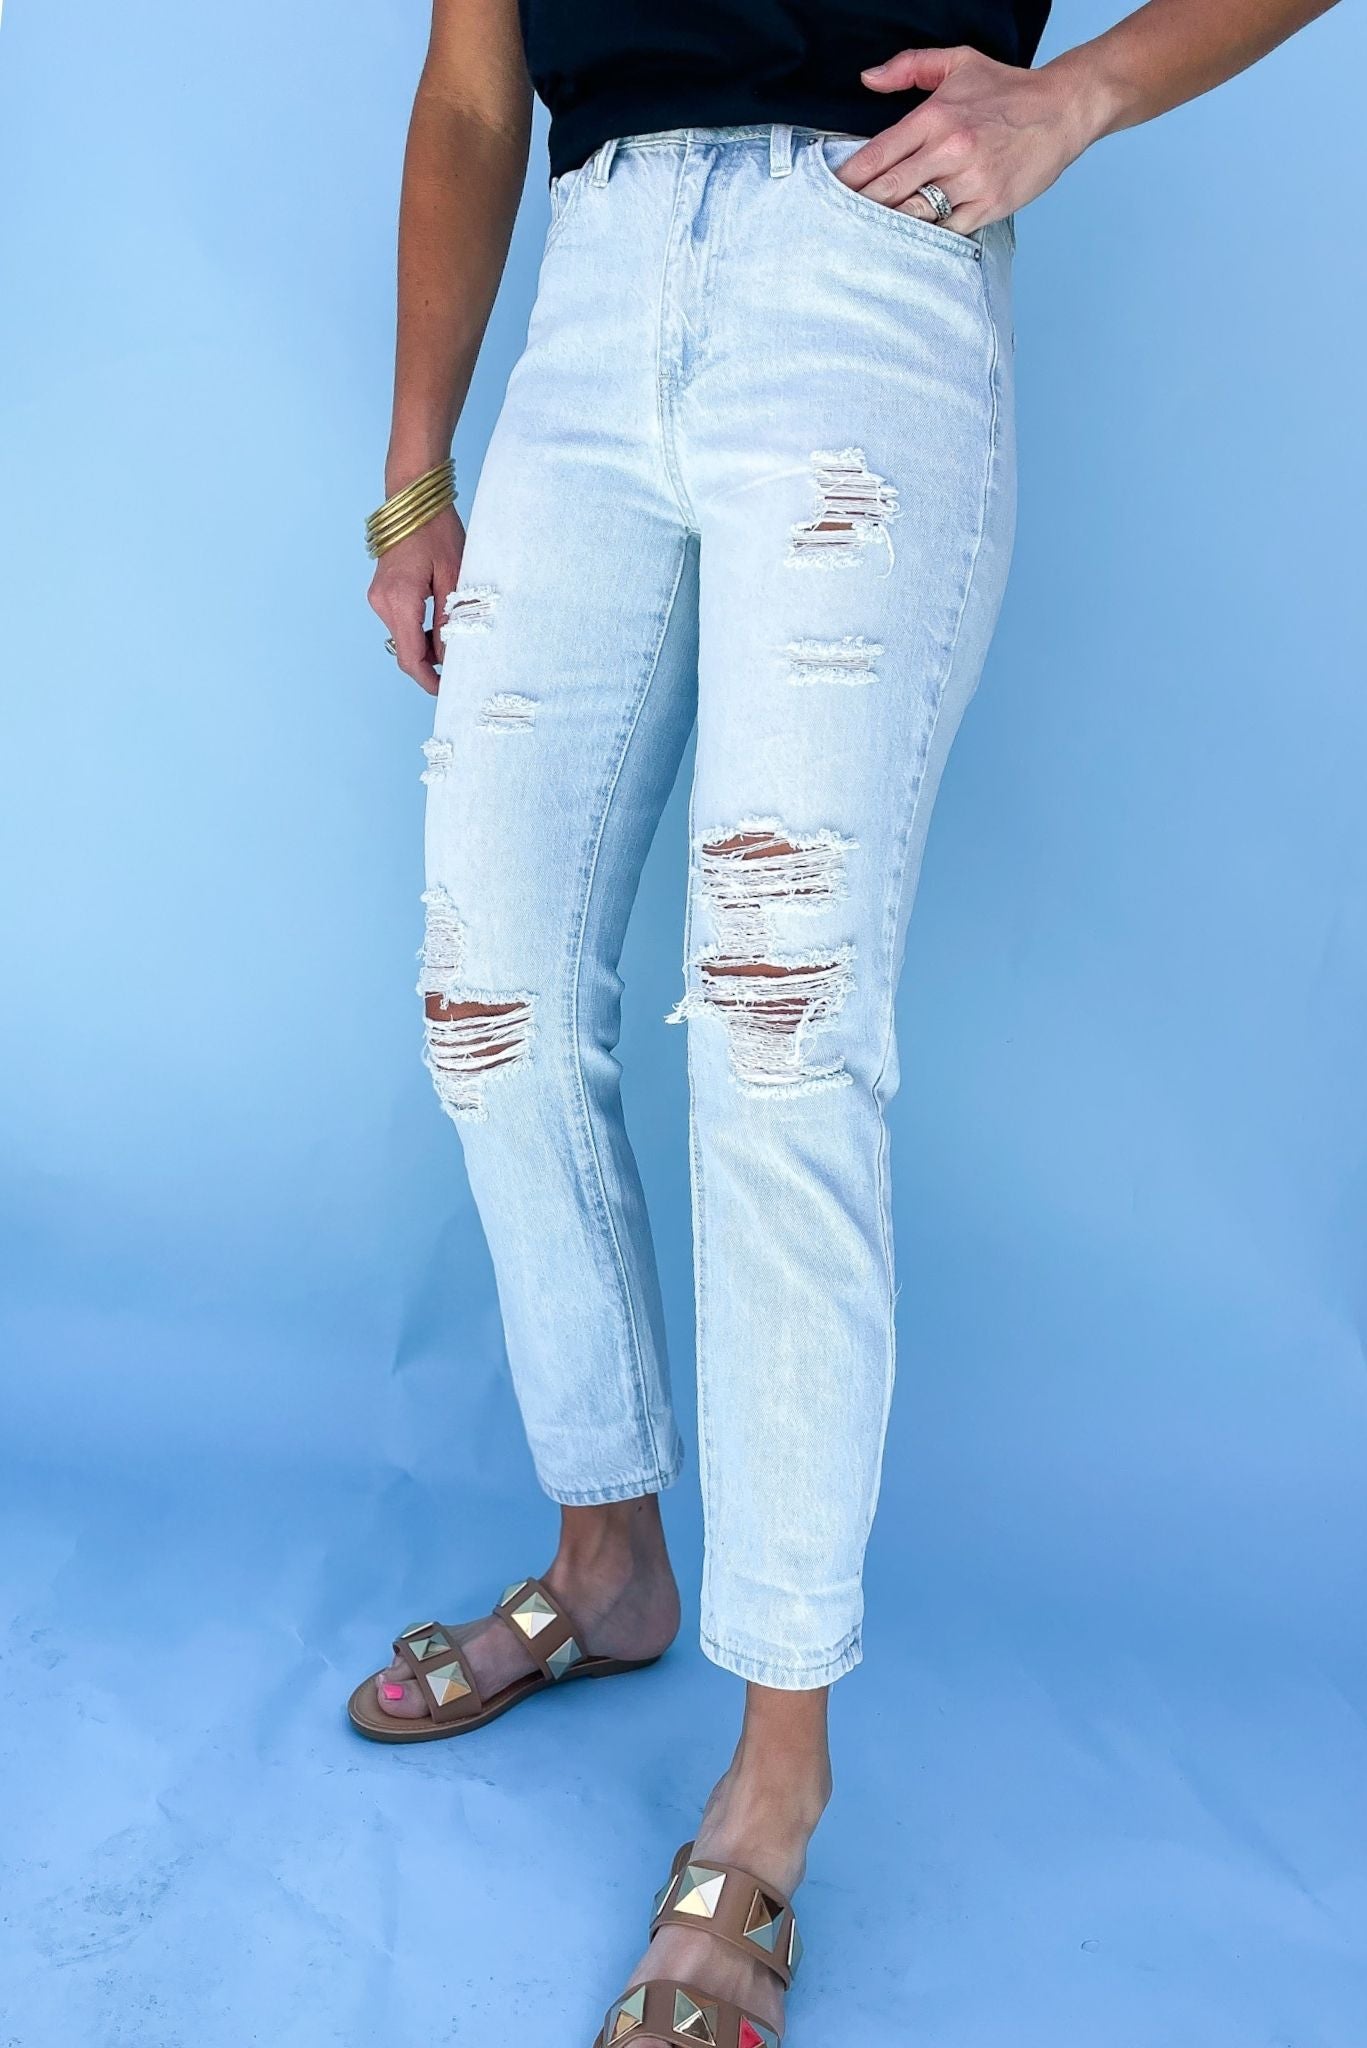 Load image into Gallery viewer, Light Wash High Rise Distressed Mom Jeans, distressed jeans, mom jeans, cuffed, light wash, denim jeans, mom jeans, summer jeans, shop style your senses by mallory fitzsimmons
